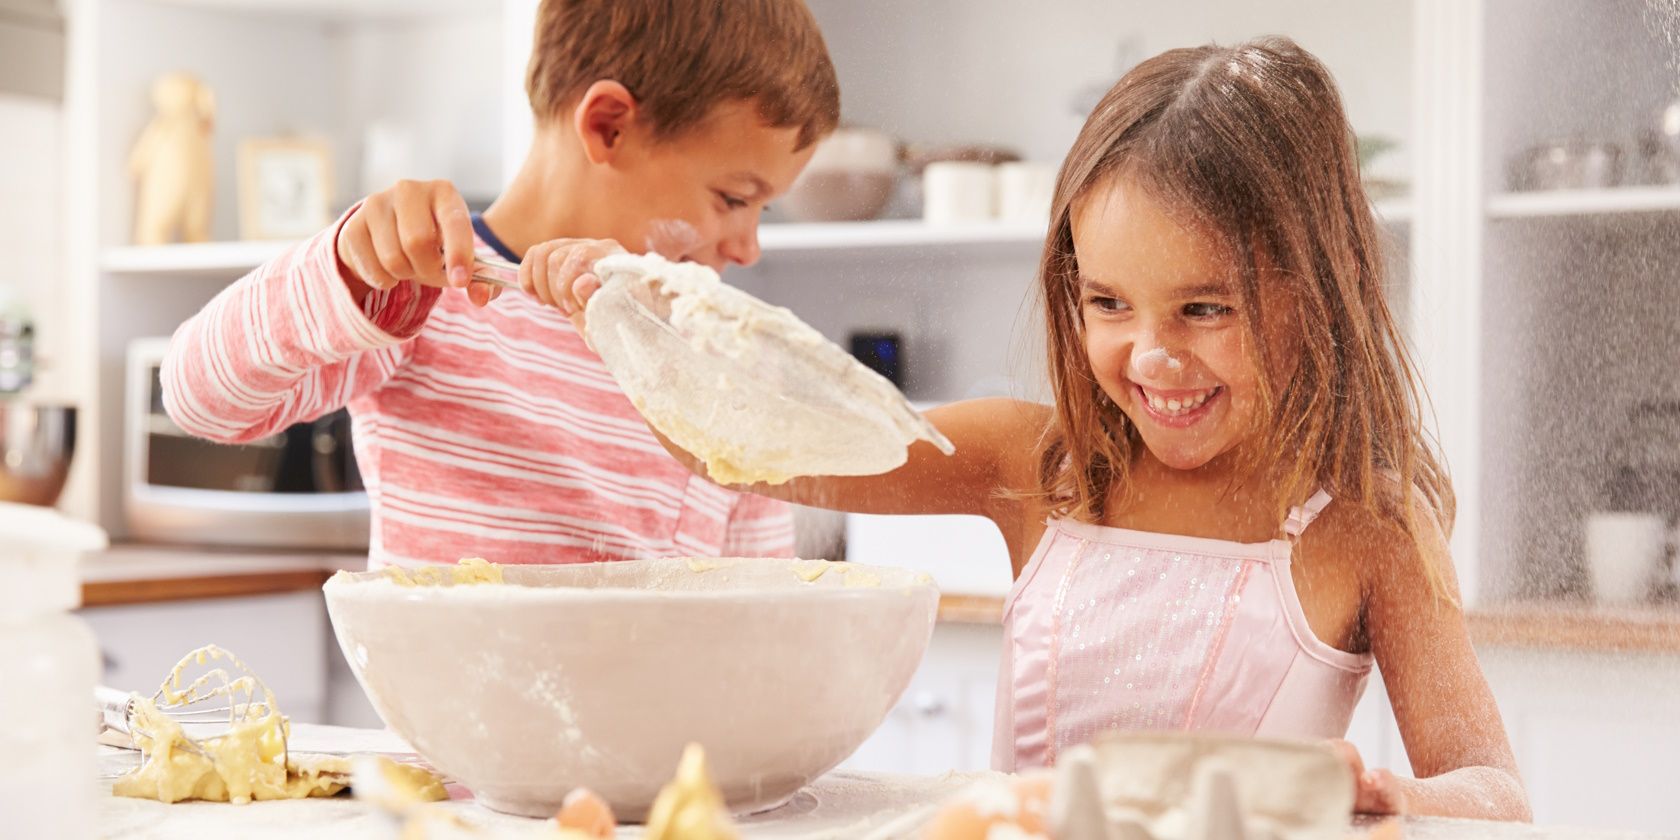 The Best Kitchen Gadgets for Kids